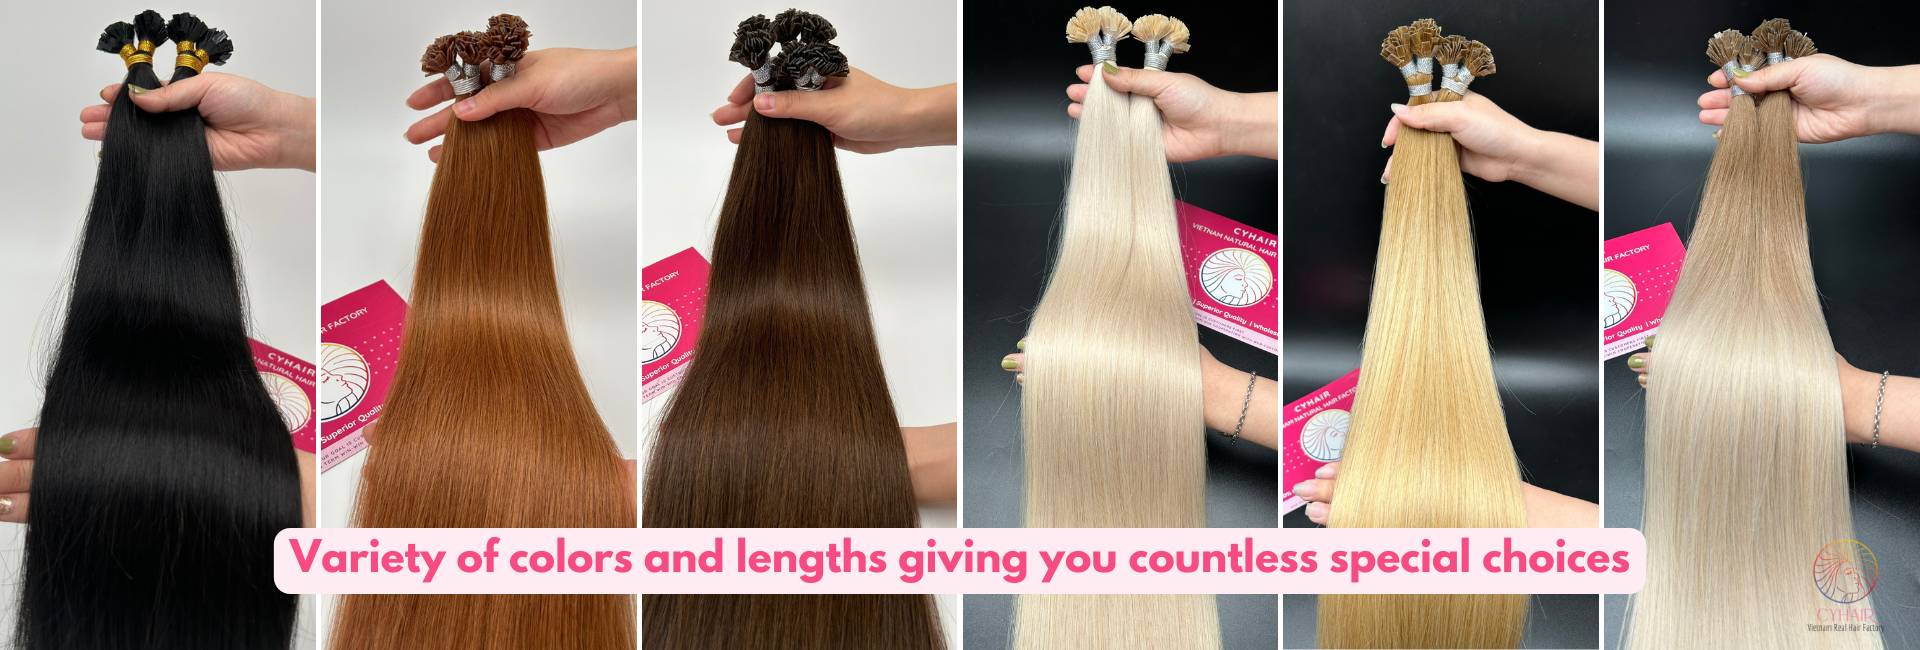 Flat Tip Hair Extensions Pros And Cons - Variety of colors and lengths 